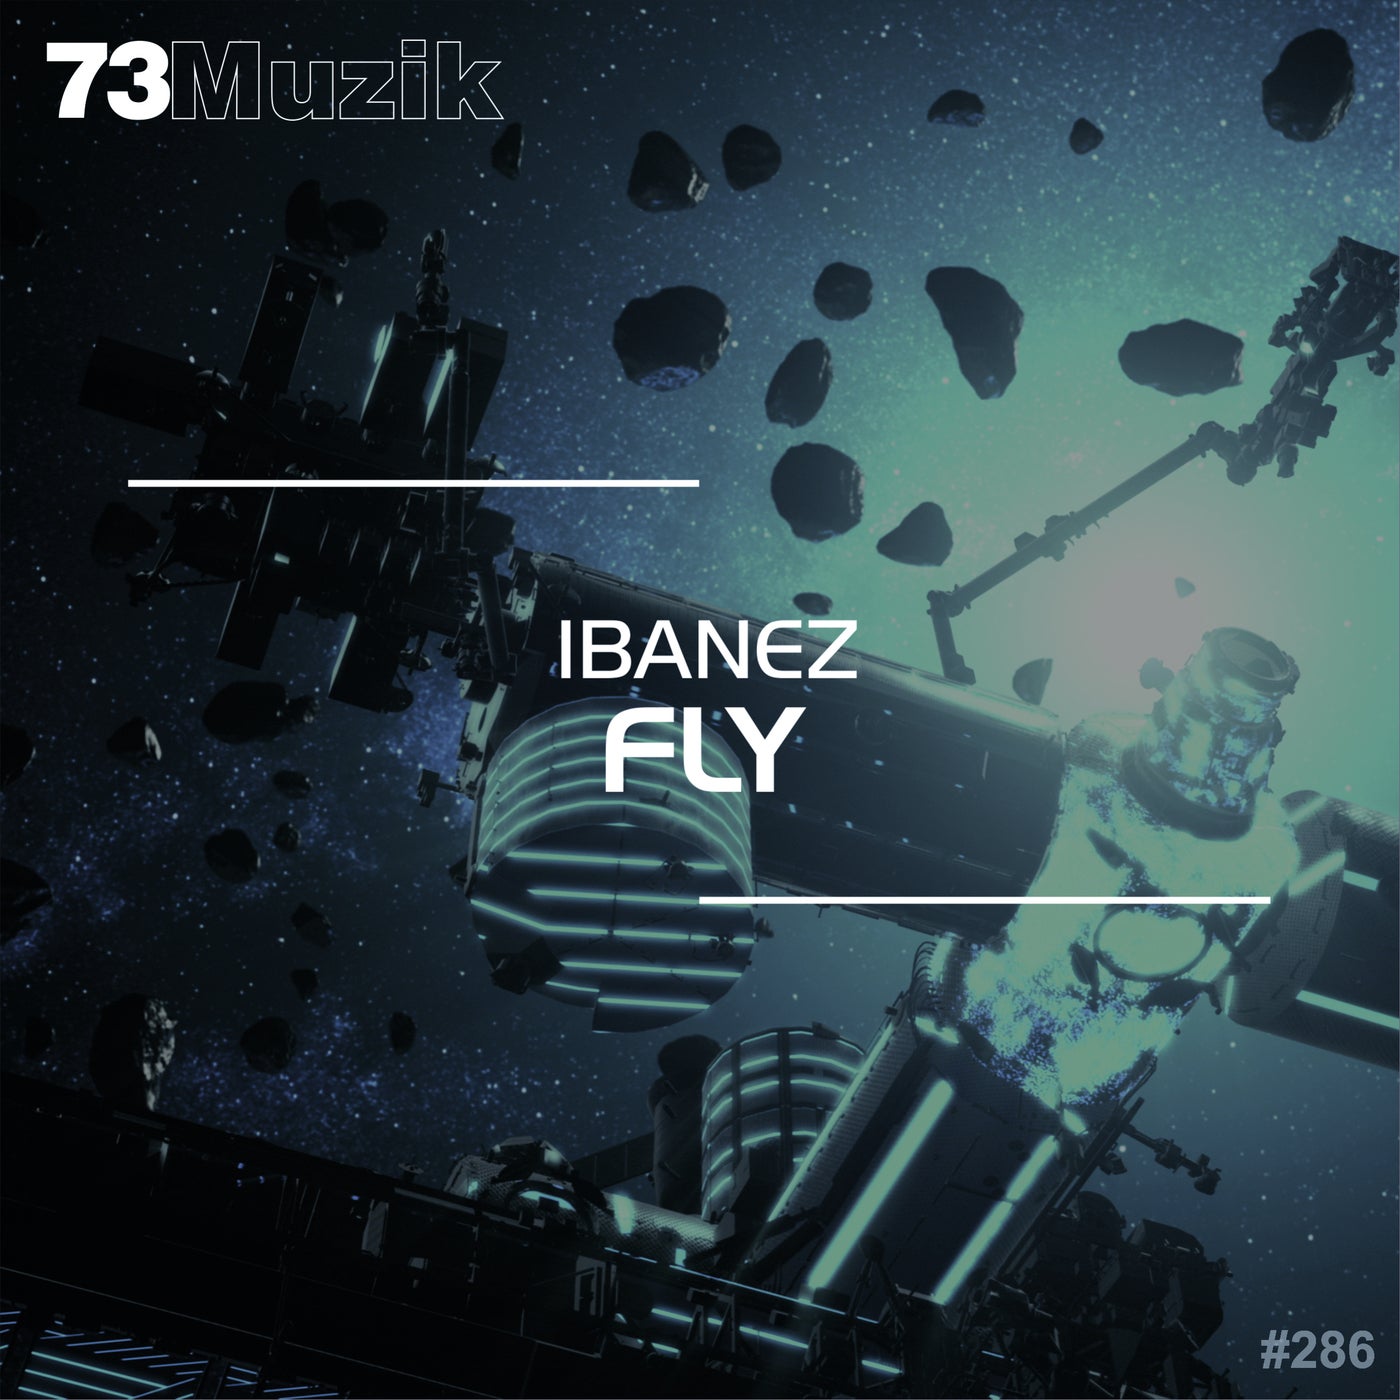 Ibanez - Fly [73M286]